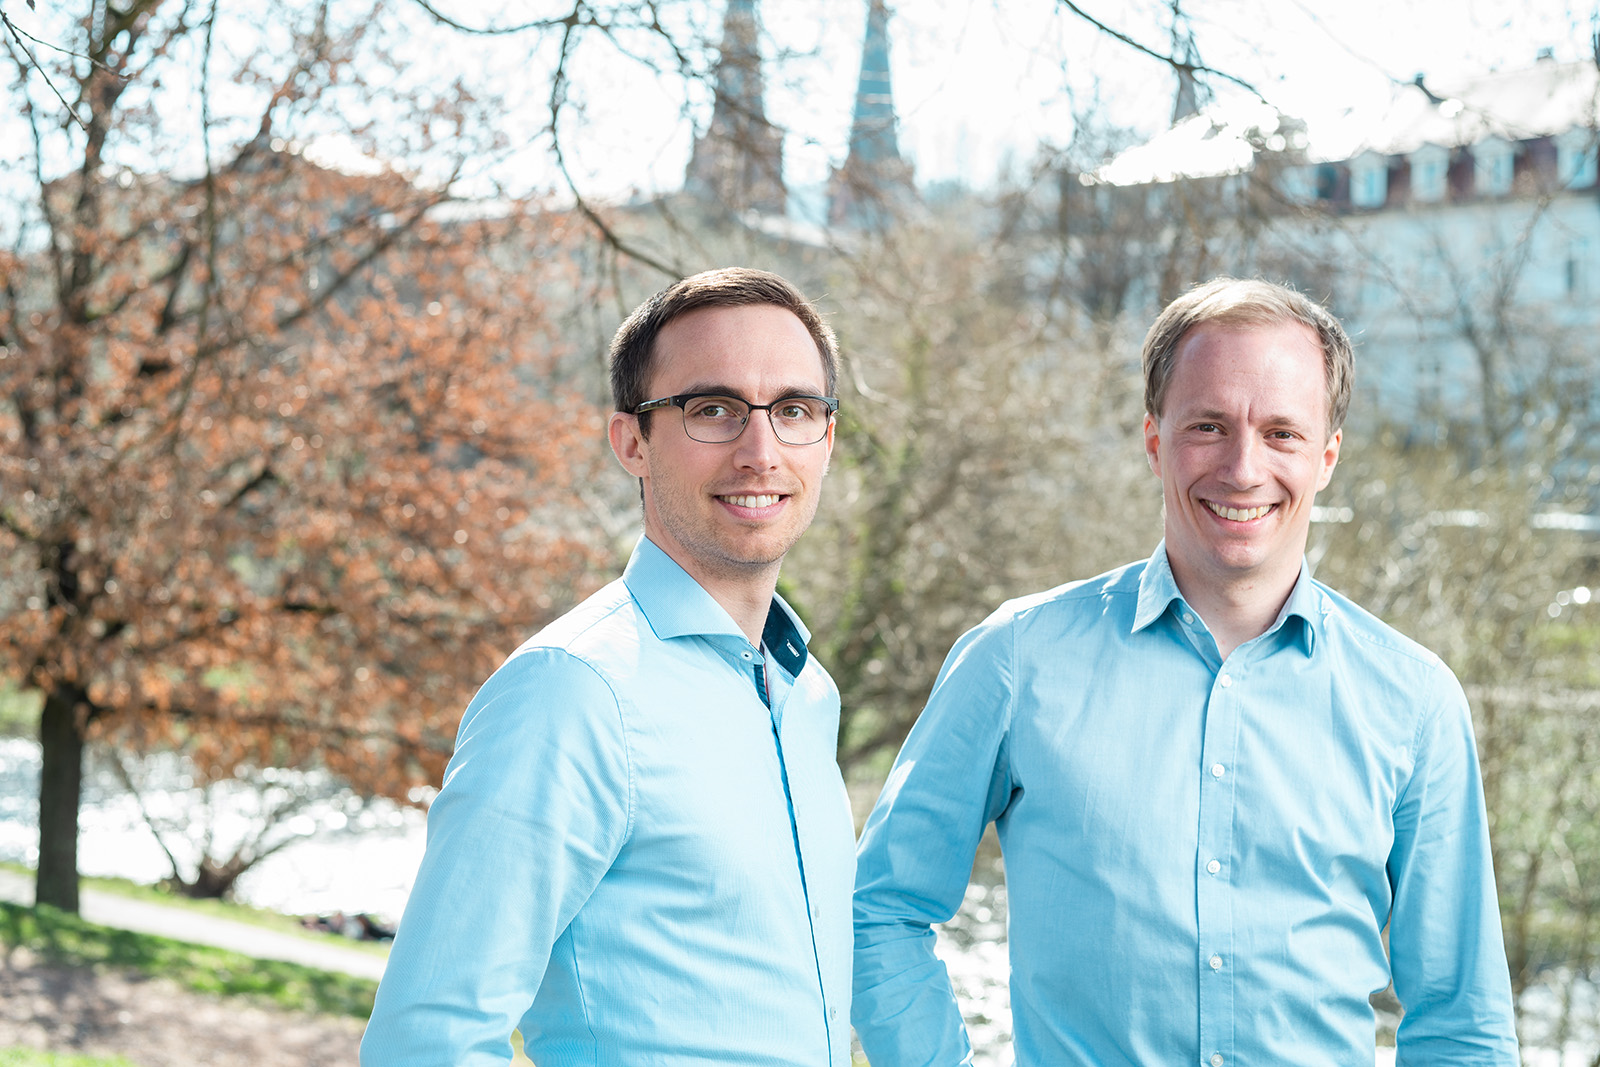 Max Gulde (right) and Marius Bierdel developed the satellite-based system that can detect drought stress and water shortage in plants.